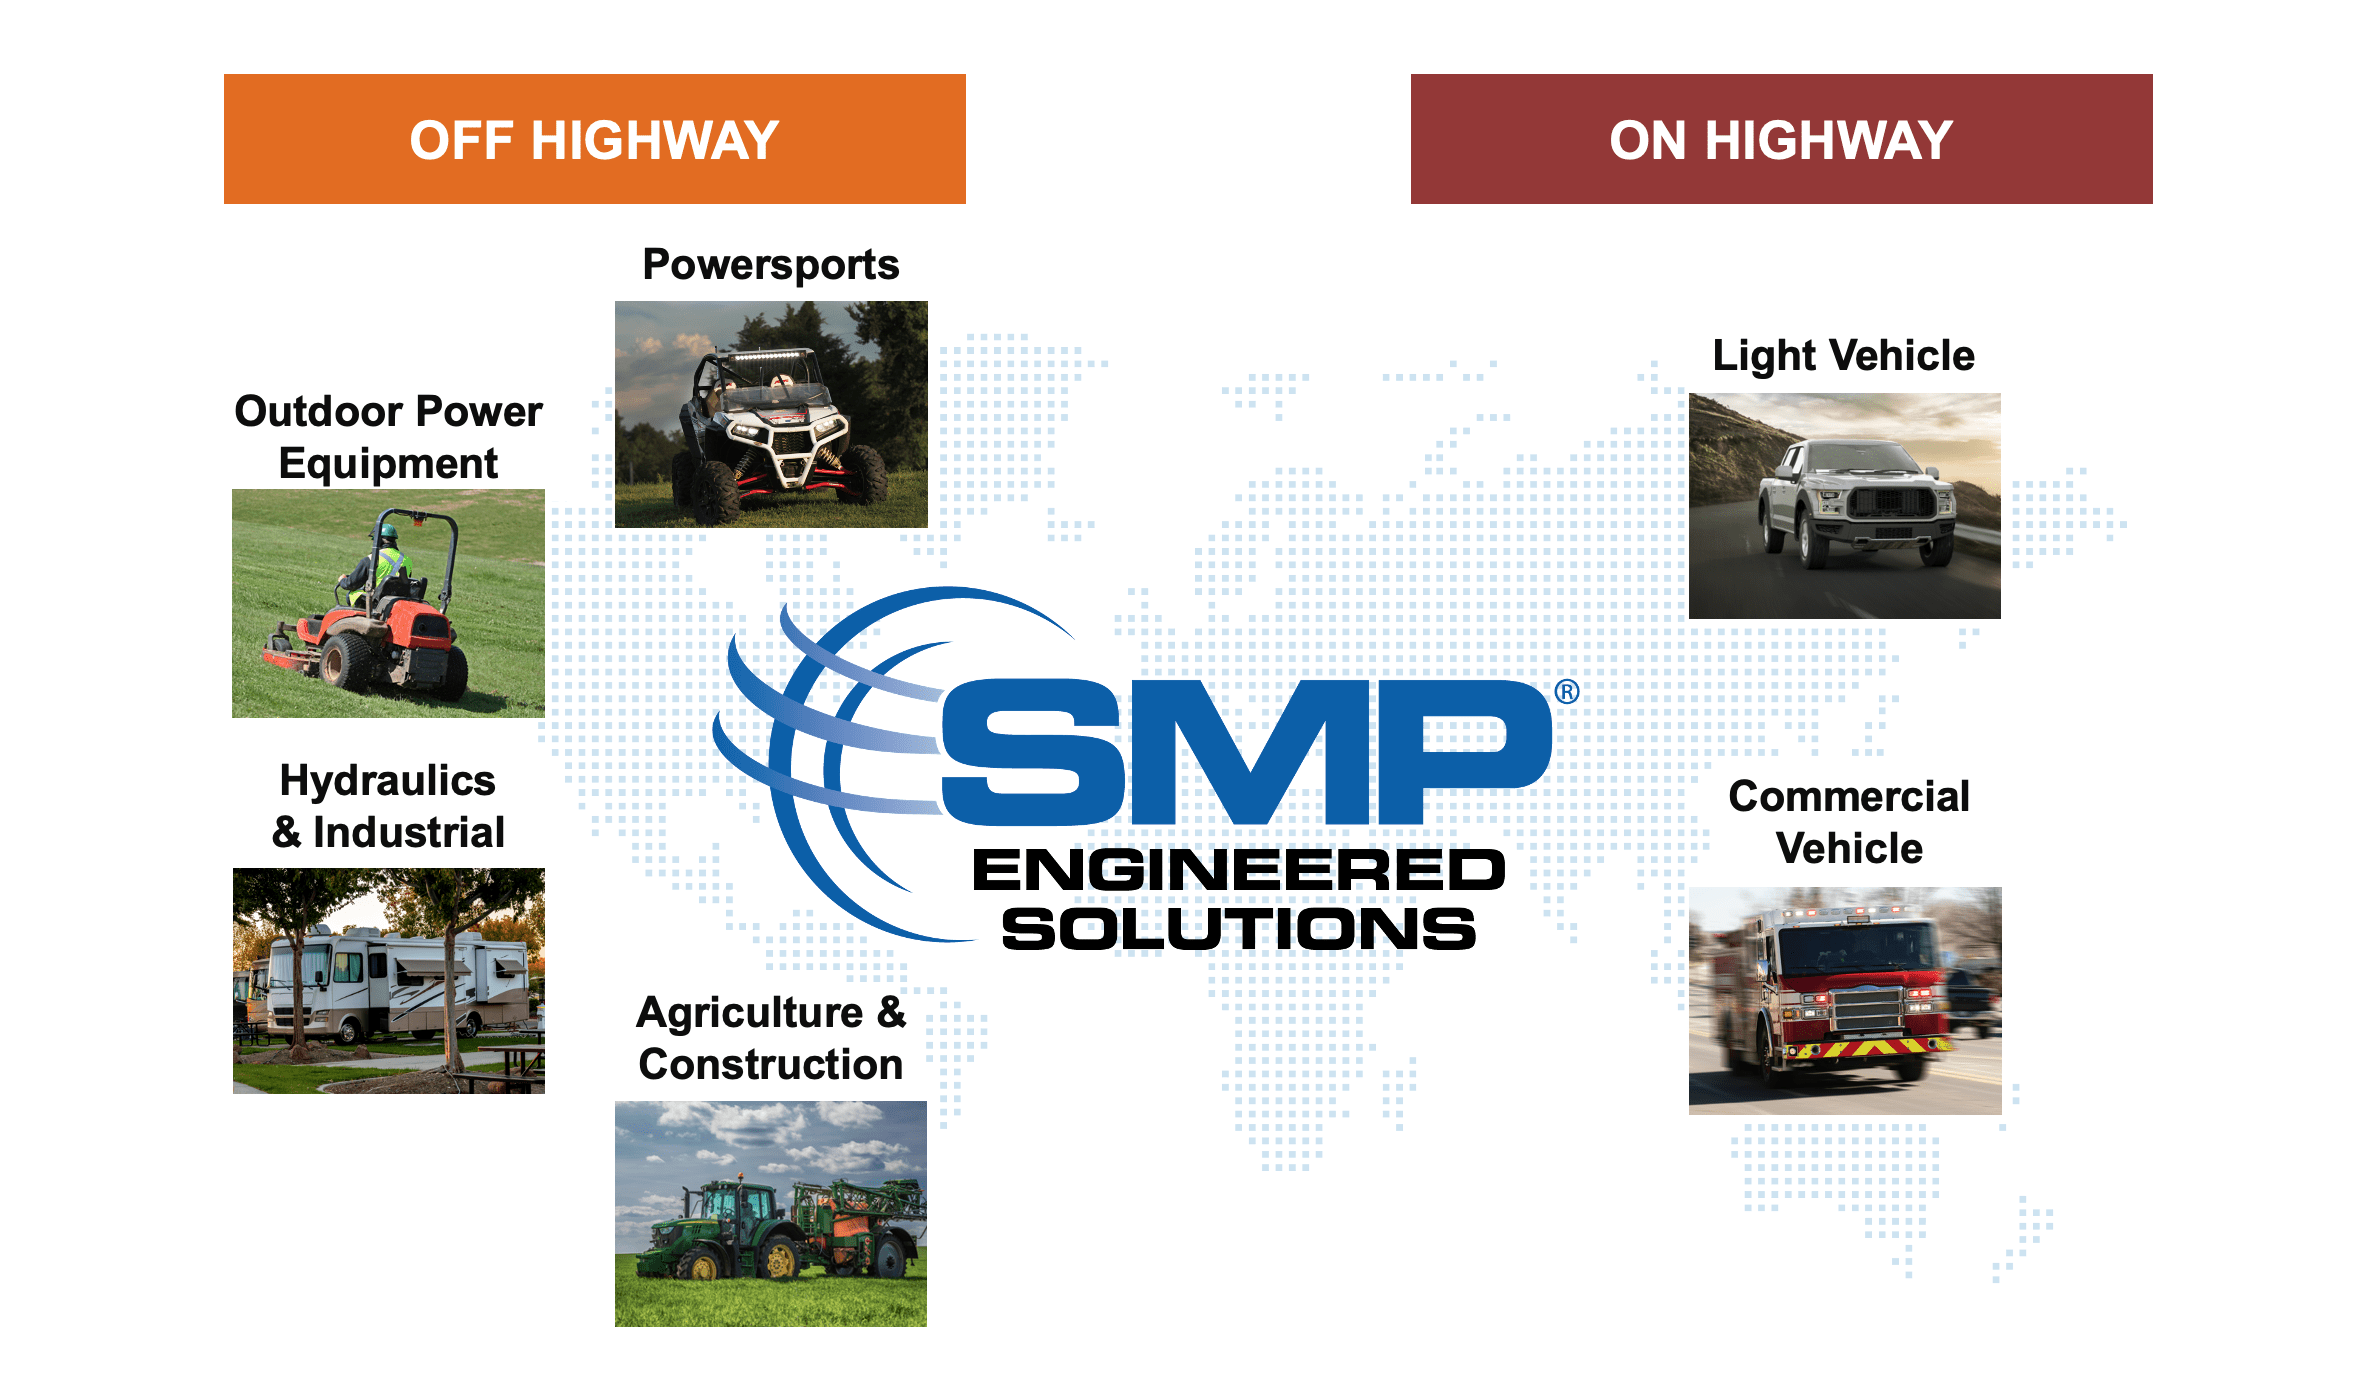 SMP Engineered Solutions Markets